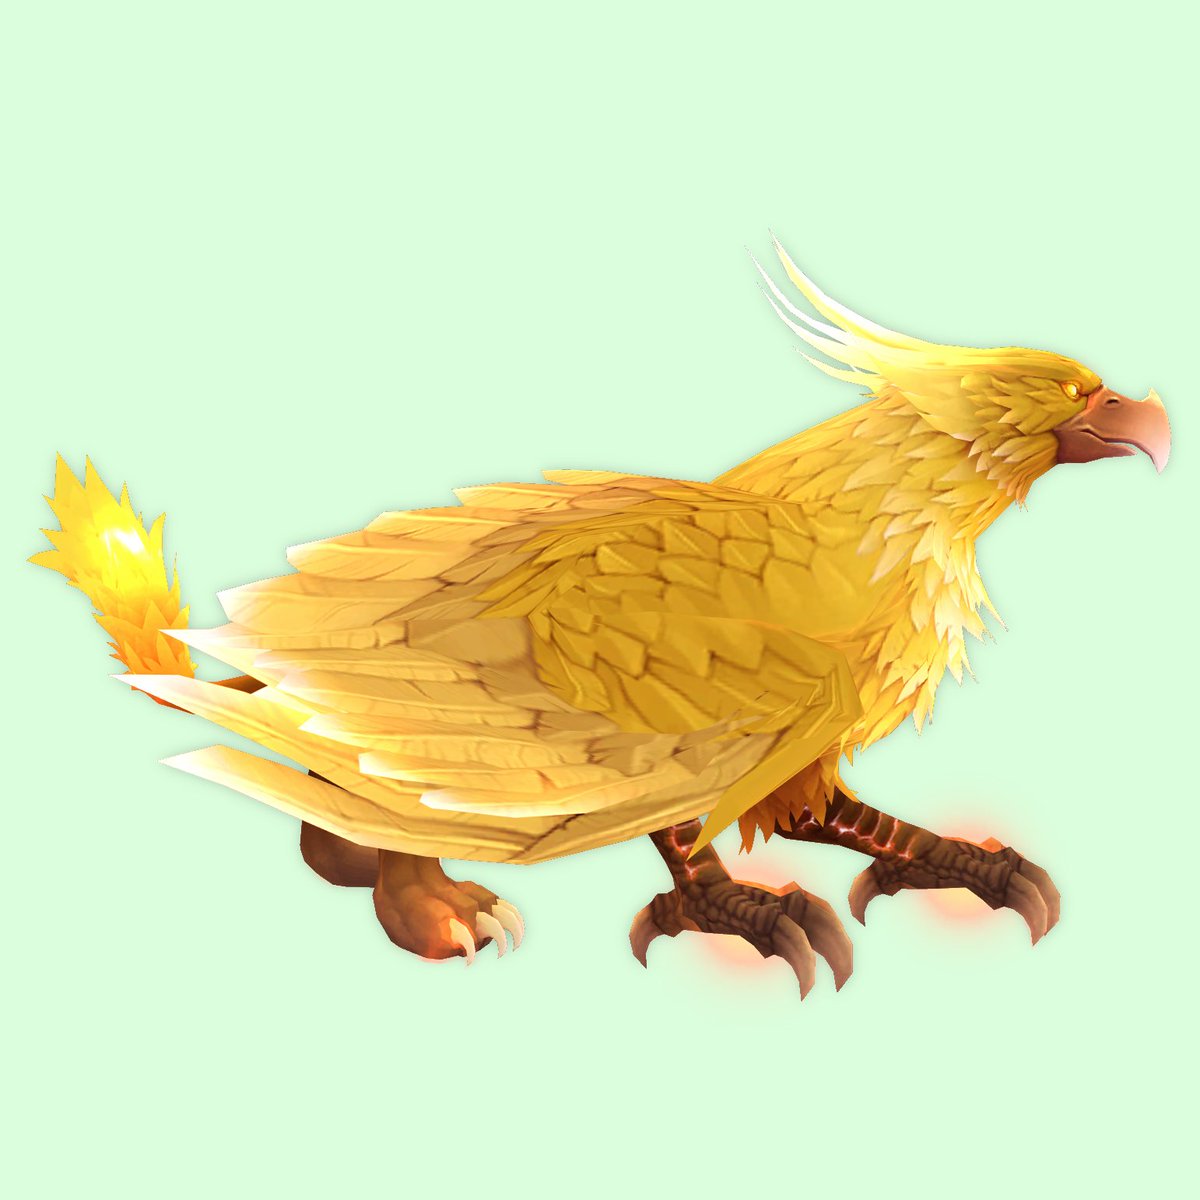 Stormrooks - wild storm gryphons - are coming in TWW.

Sadly, NONE ARE YET TAMABLE & most are classed as Elementals. But they make just as much sense as Beasts.

The sheer level of customisation means there's a daunting 1200 possible shape combos!! 😱But only 3 are being used.